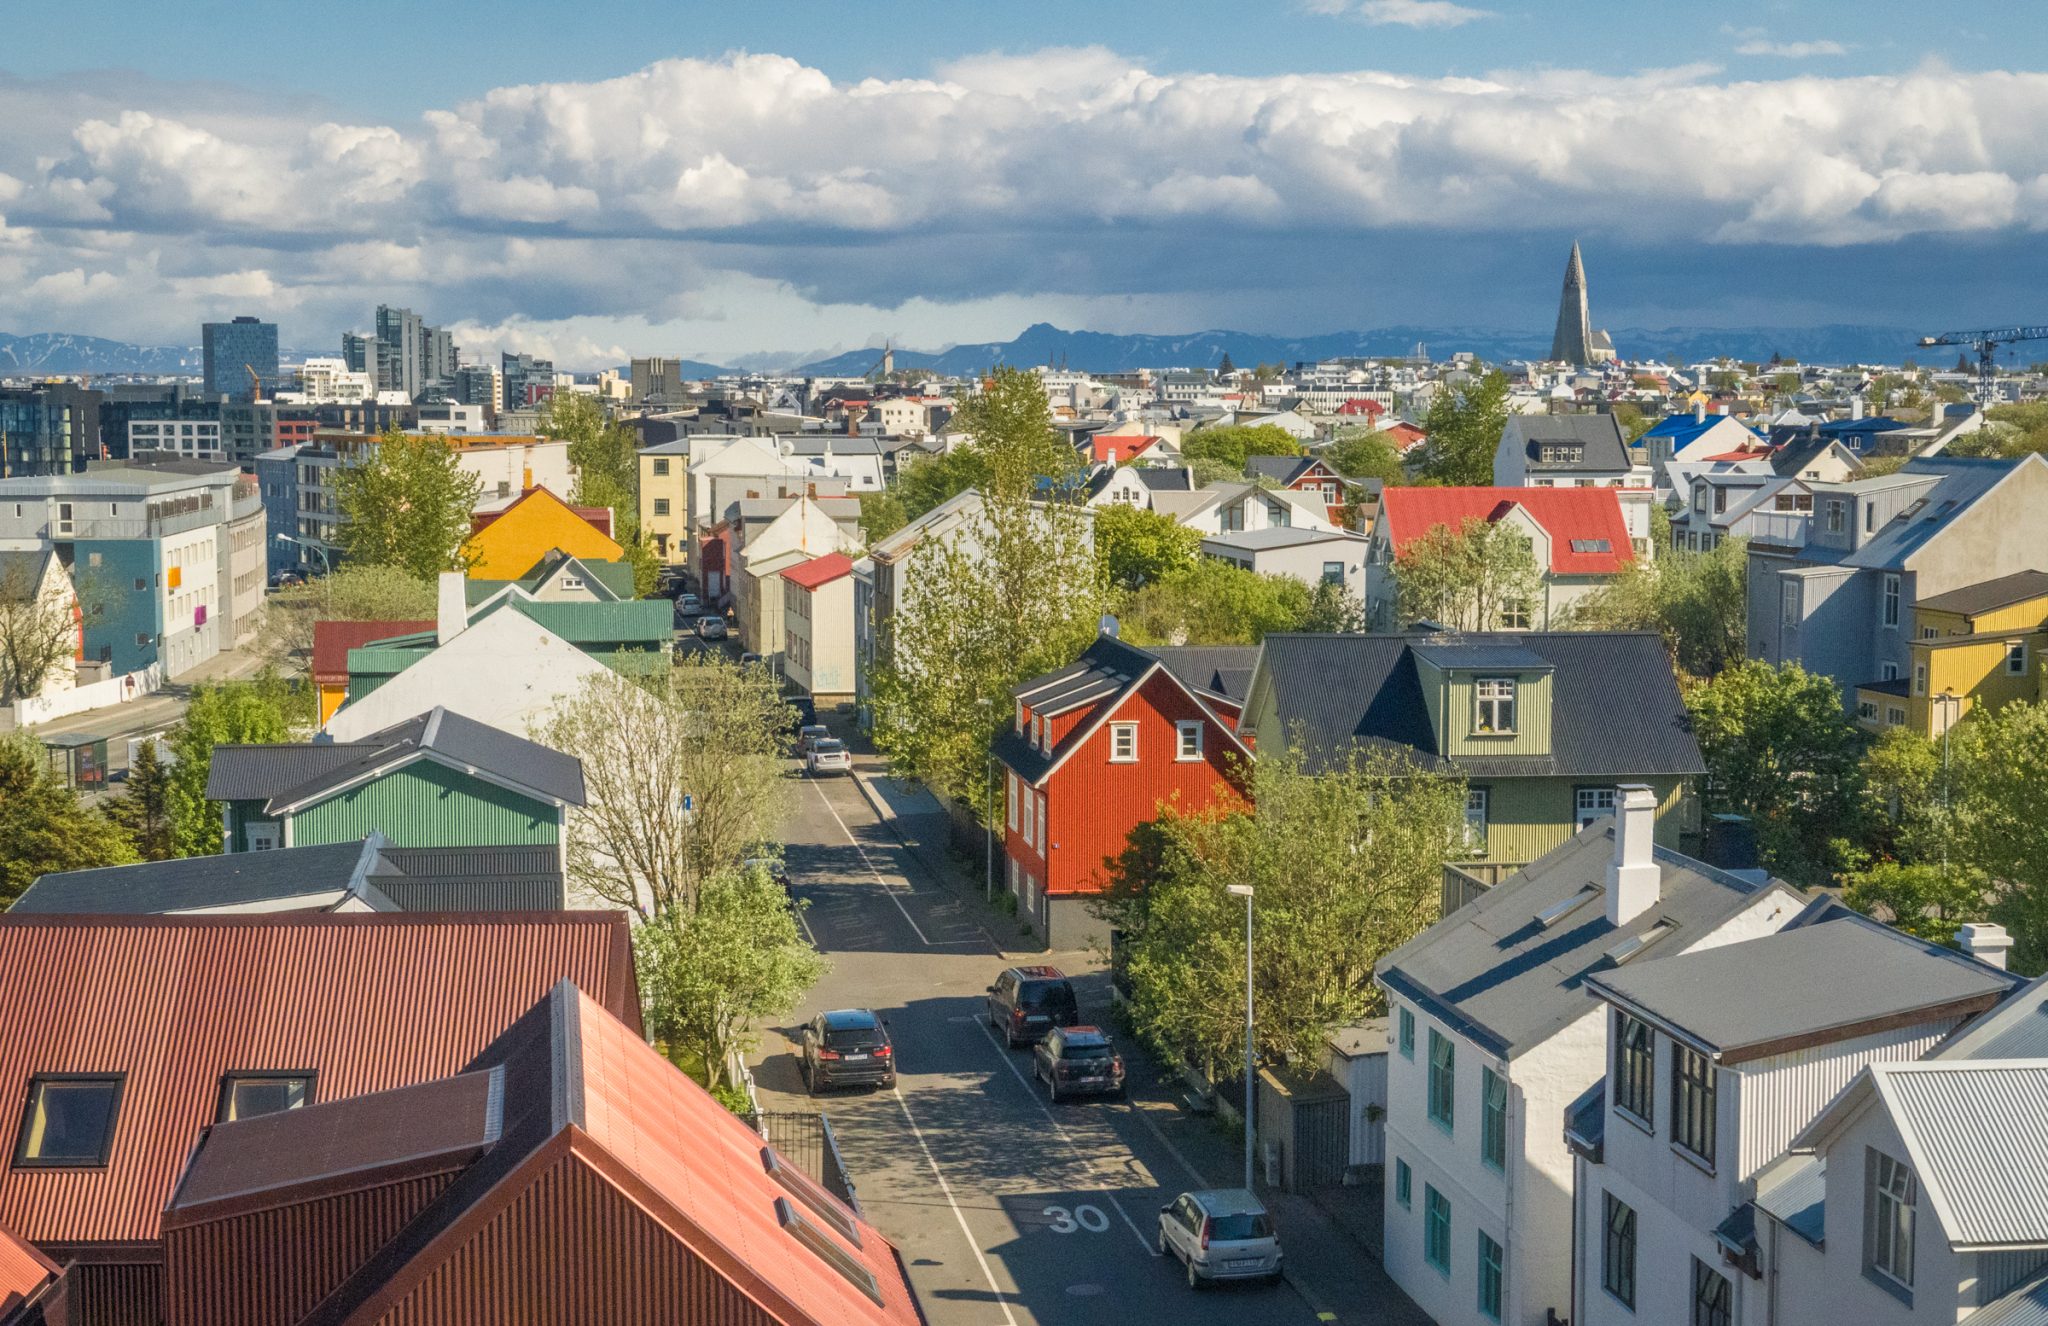 A Day in My Life in Reykjavik, Iceland